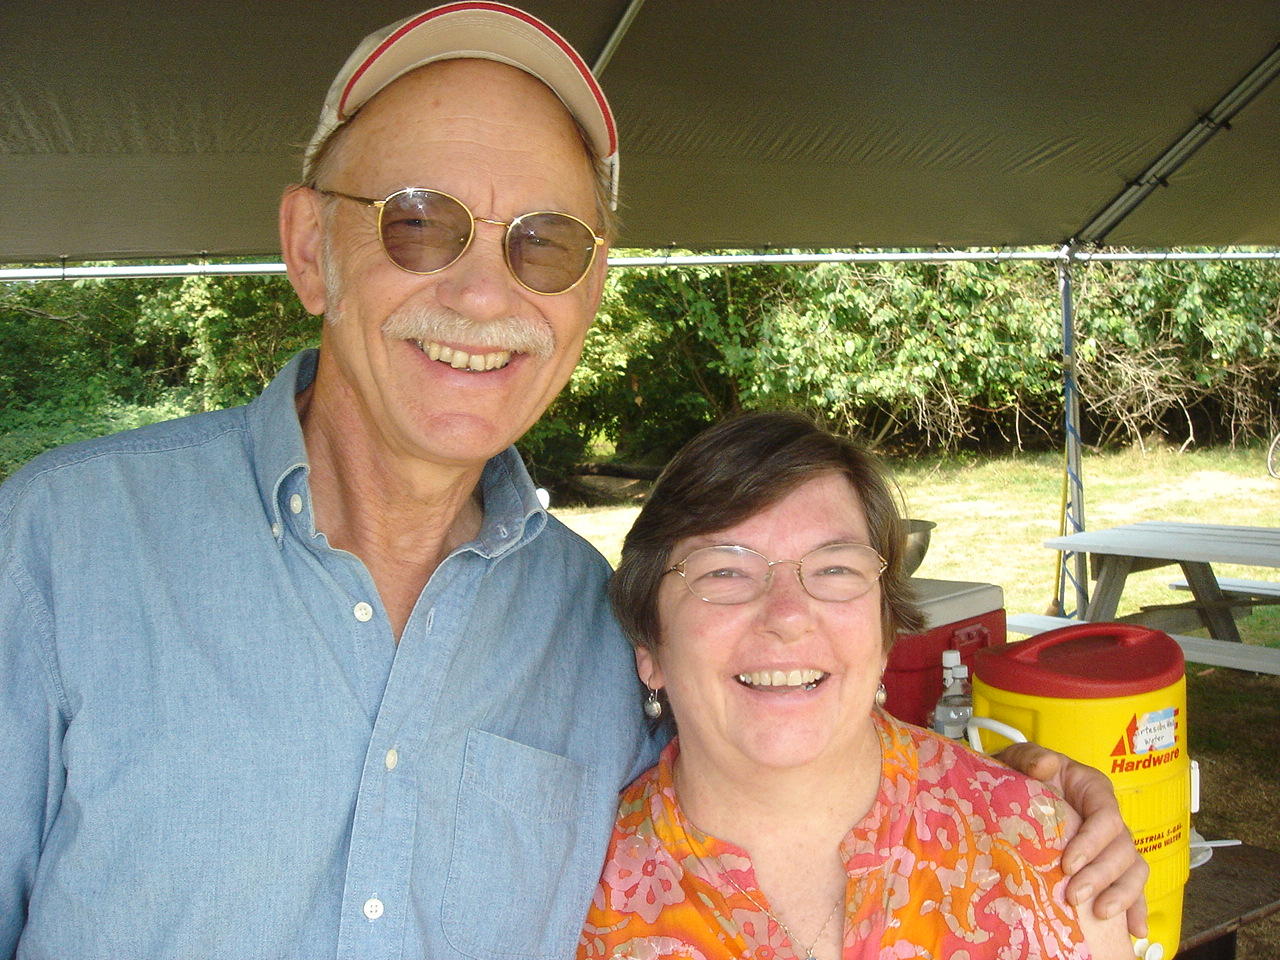 John Luna and Sue Ruthaford from Corvallis, OR